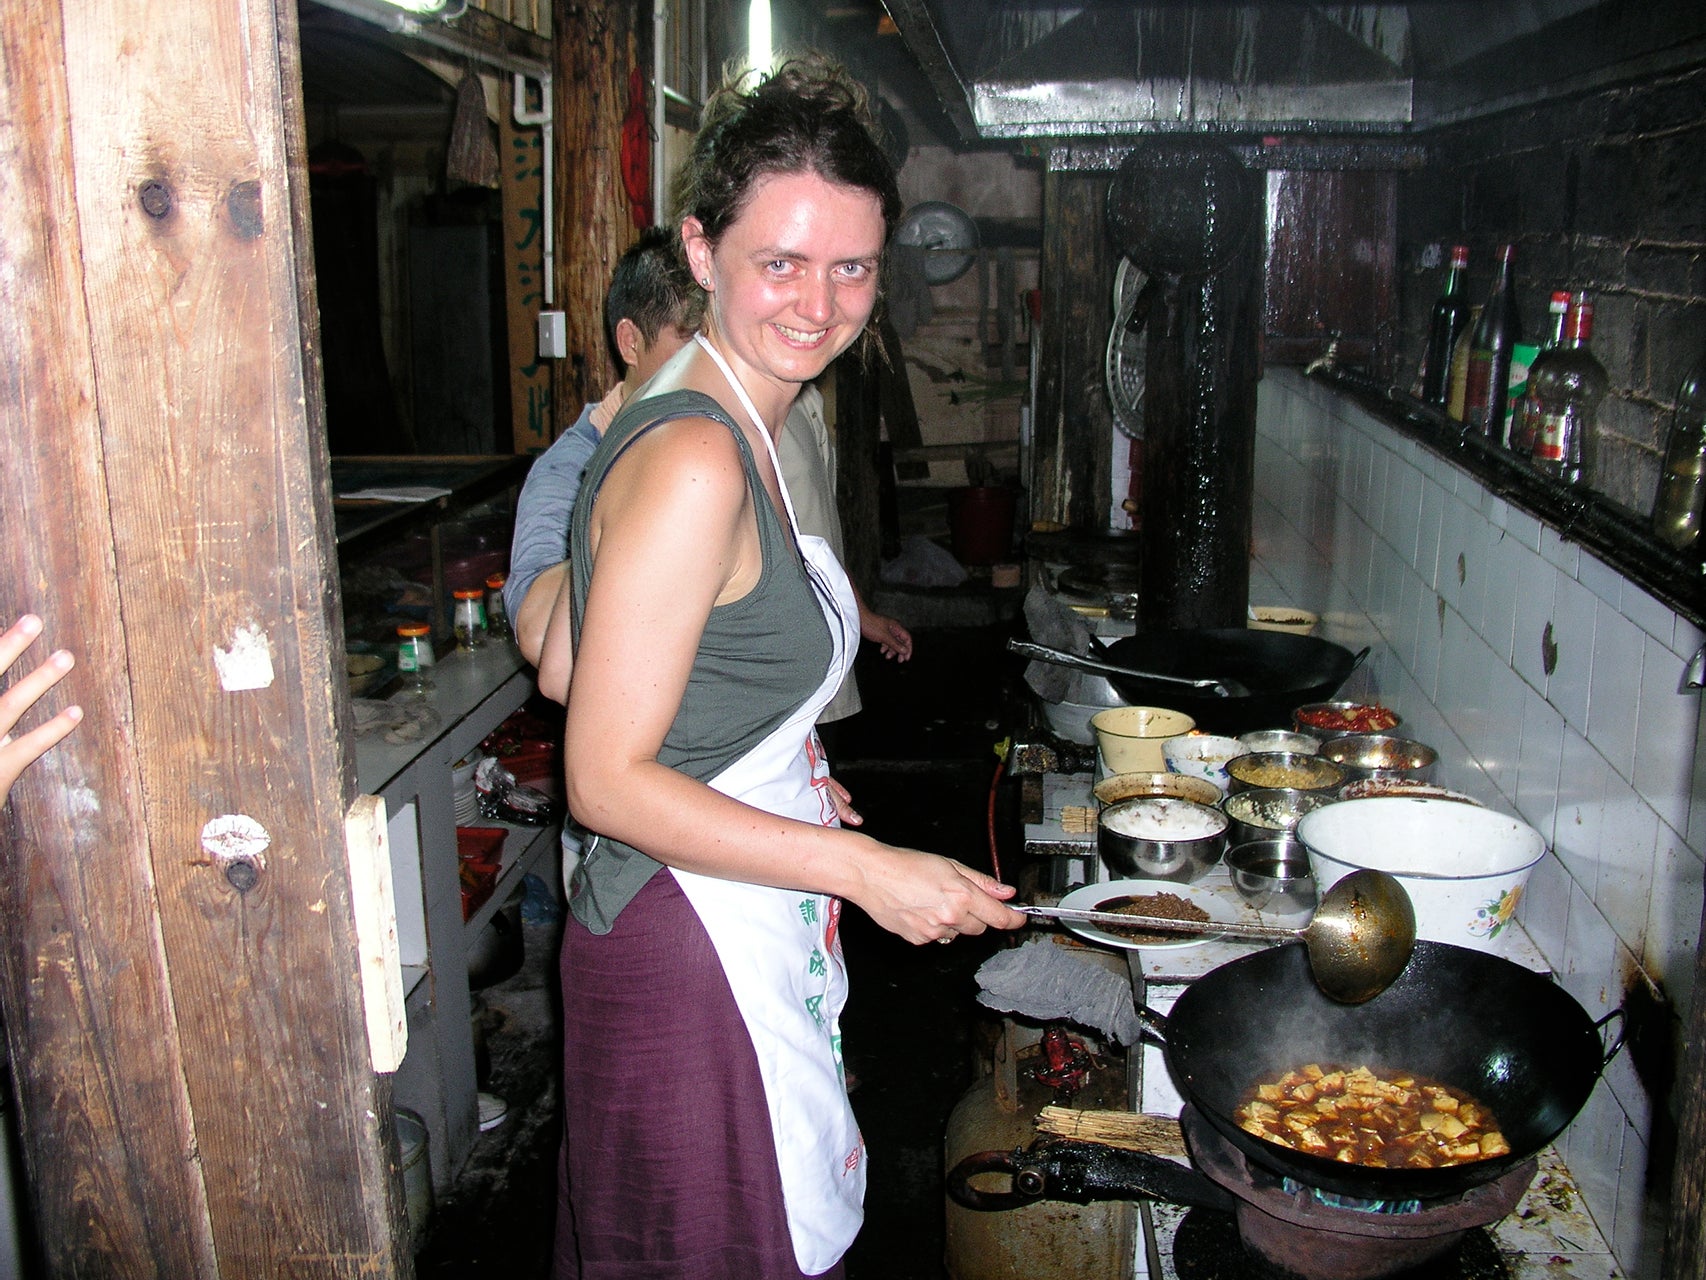 Fuchsia Dunlop cooks Mapo tofu, stir-fried tofu in hot sauce, in the kitchen of a restaurant in Fenghuang ancient town in western Hunan province.